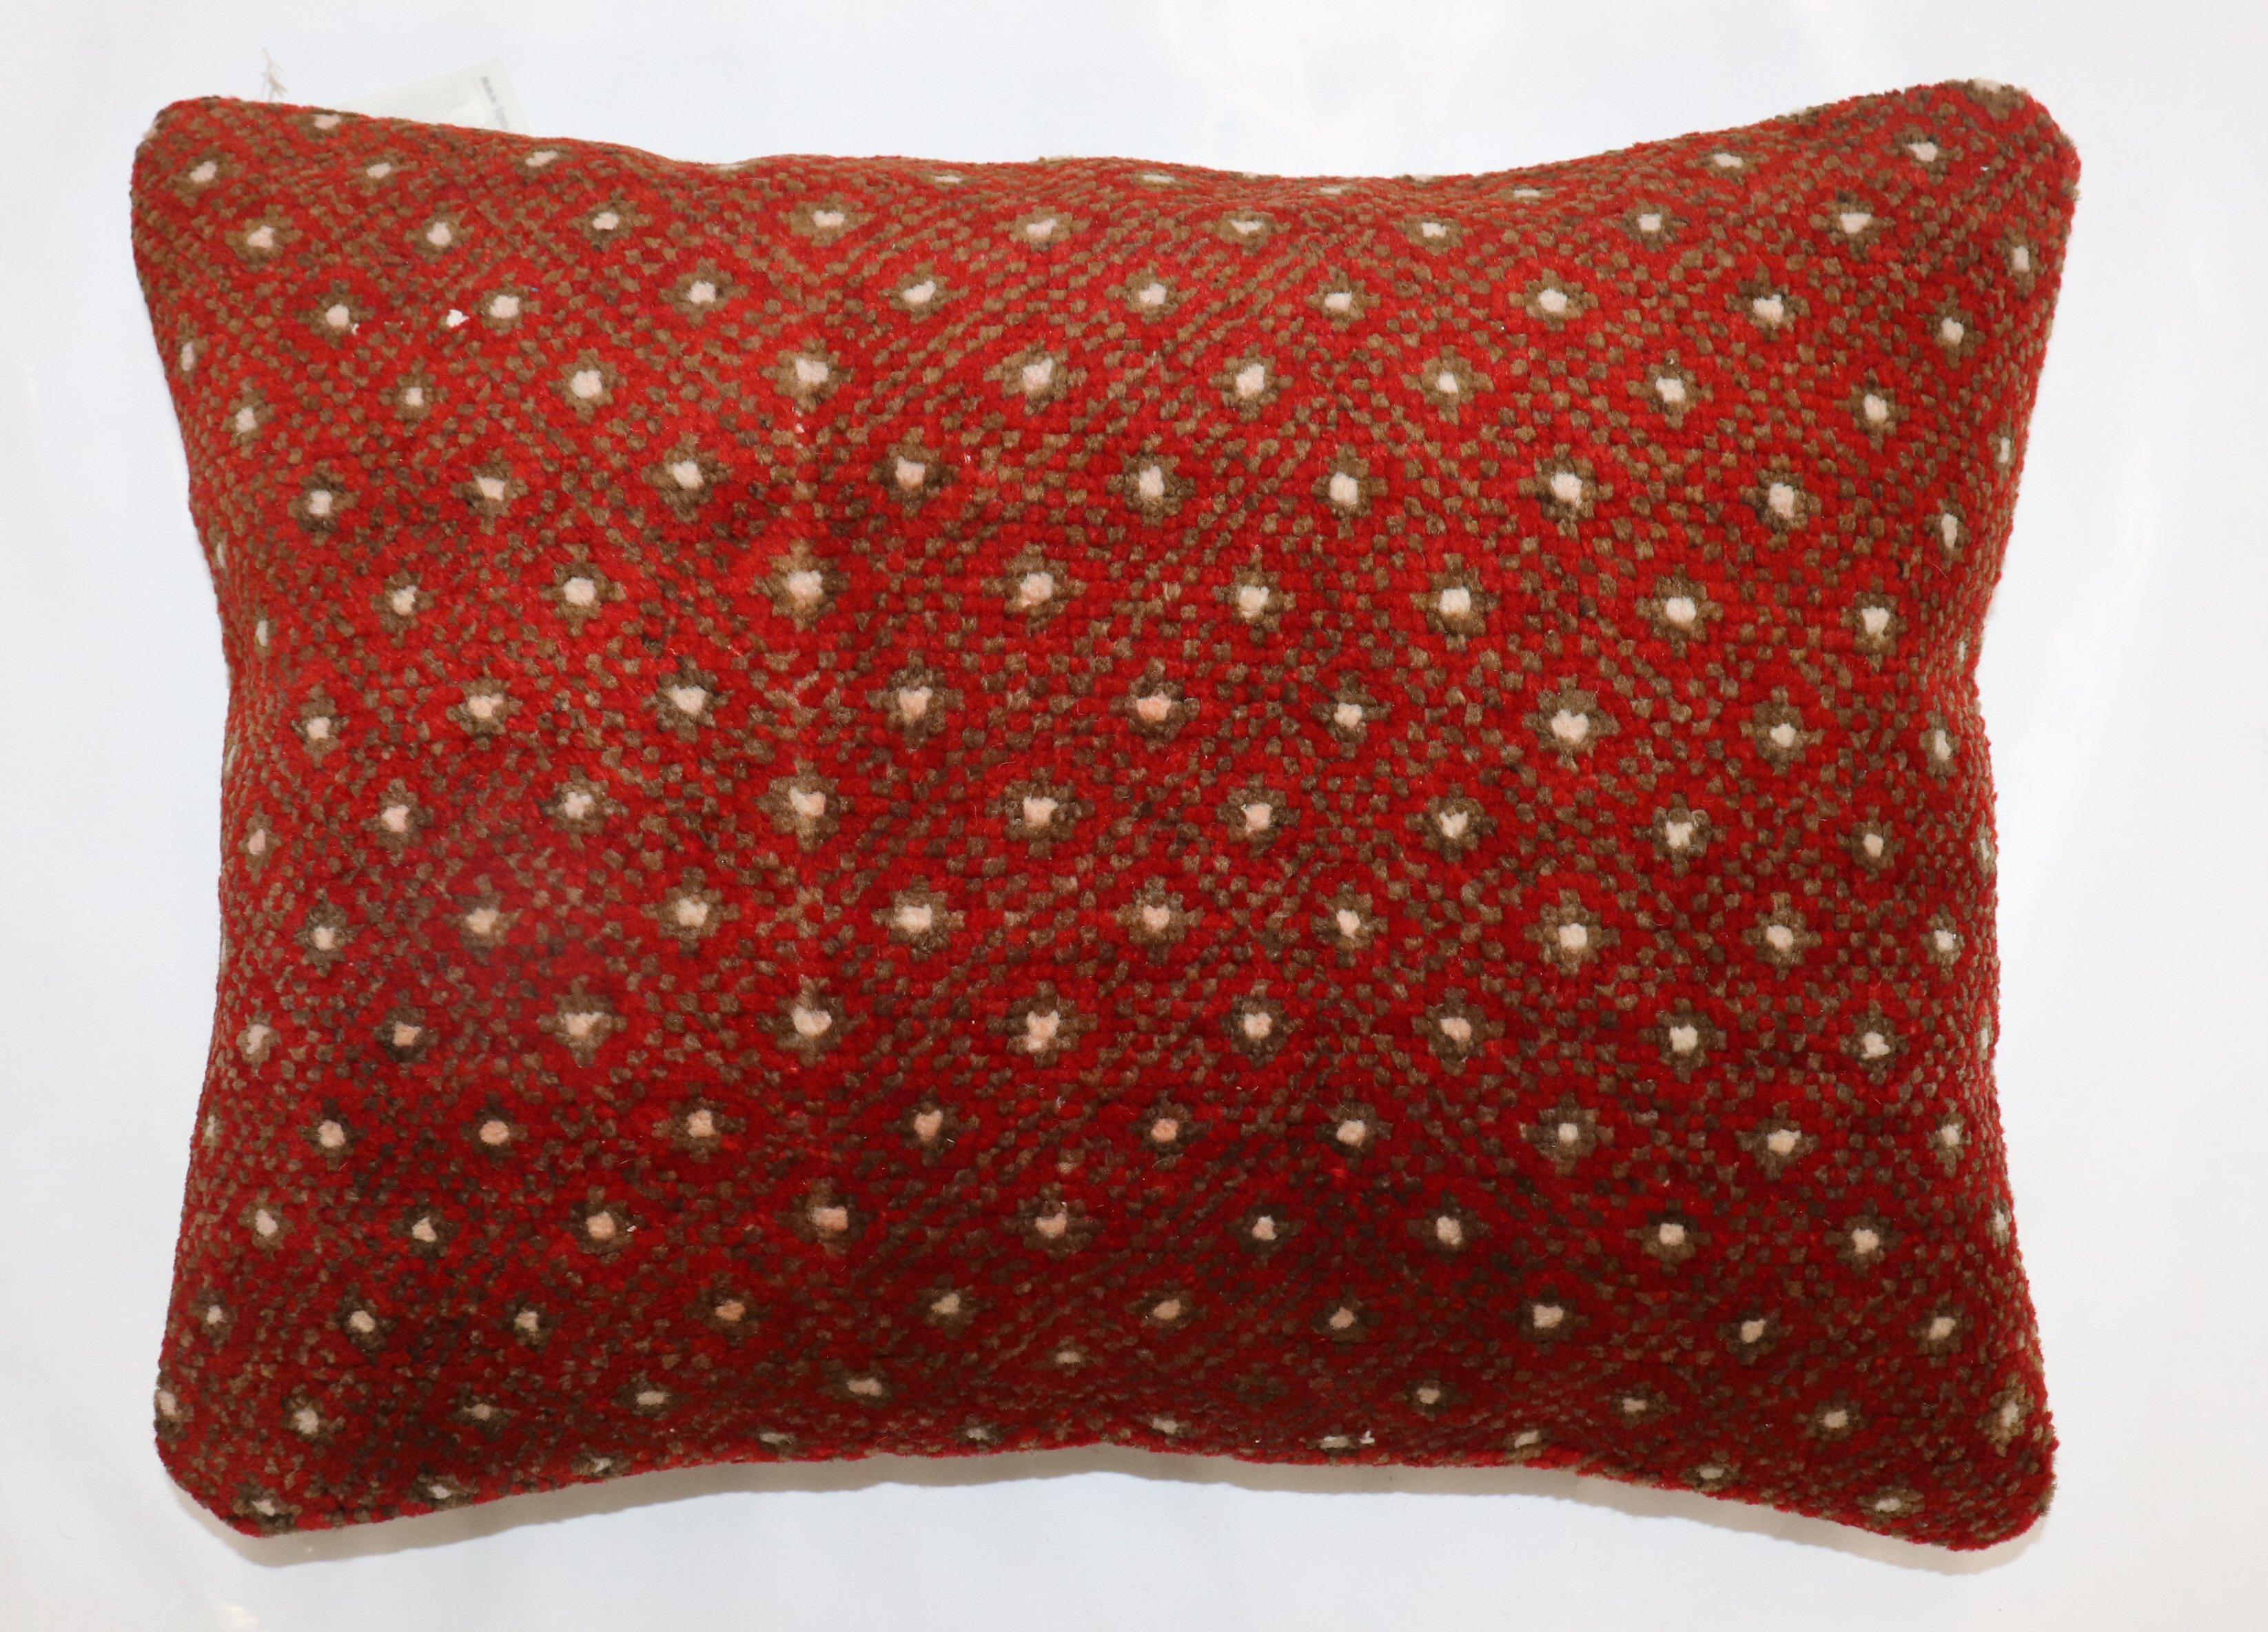 Pillow made from a mid-20th century turkish anatolian rug. Zipper closure and polyfill provided

Measures: 17'' x 22''.